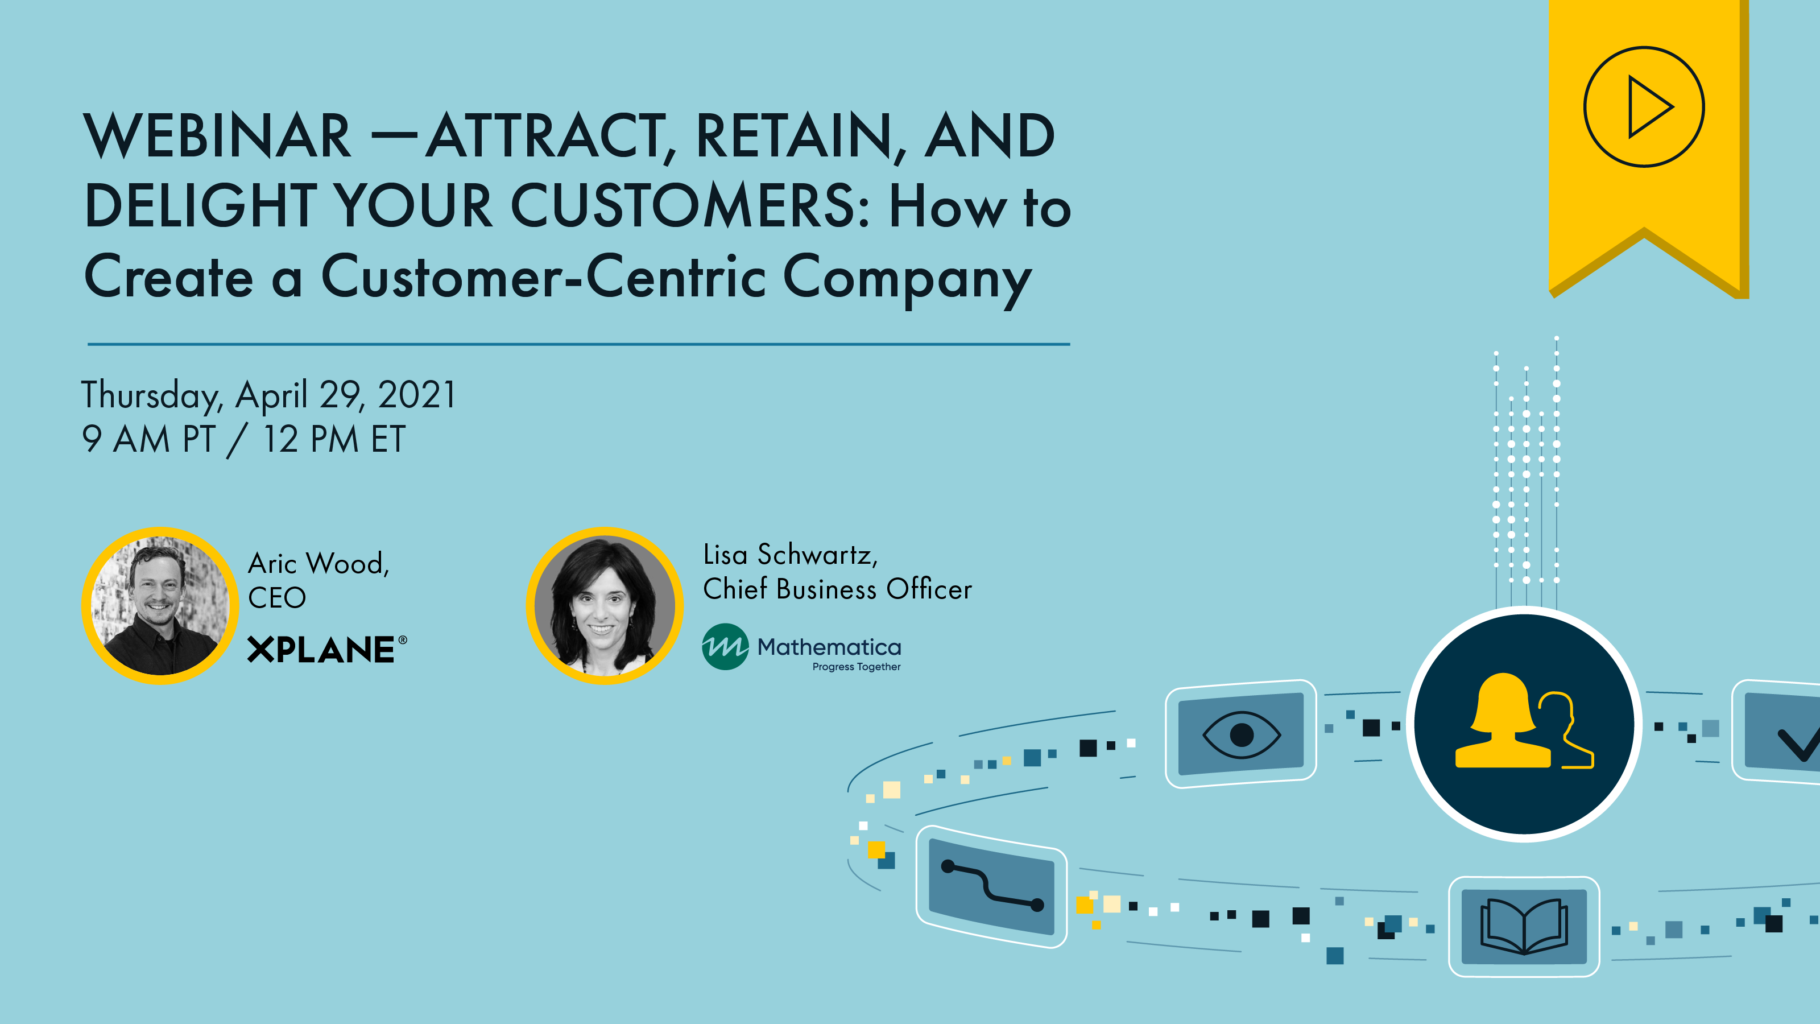 Header image of a blue icon with two people at the center of a circle showing different steps of the XPLANE process. Text to the left reads “Webinar — Attract, Retain, and Delight Your Customers: How to Create a Customer-Centric Company. Thursday, April 29, 2021, 9am PT/12pm ET”. Above is a yellow tag with a black play button icon denoting that this webinar has a recording available.